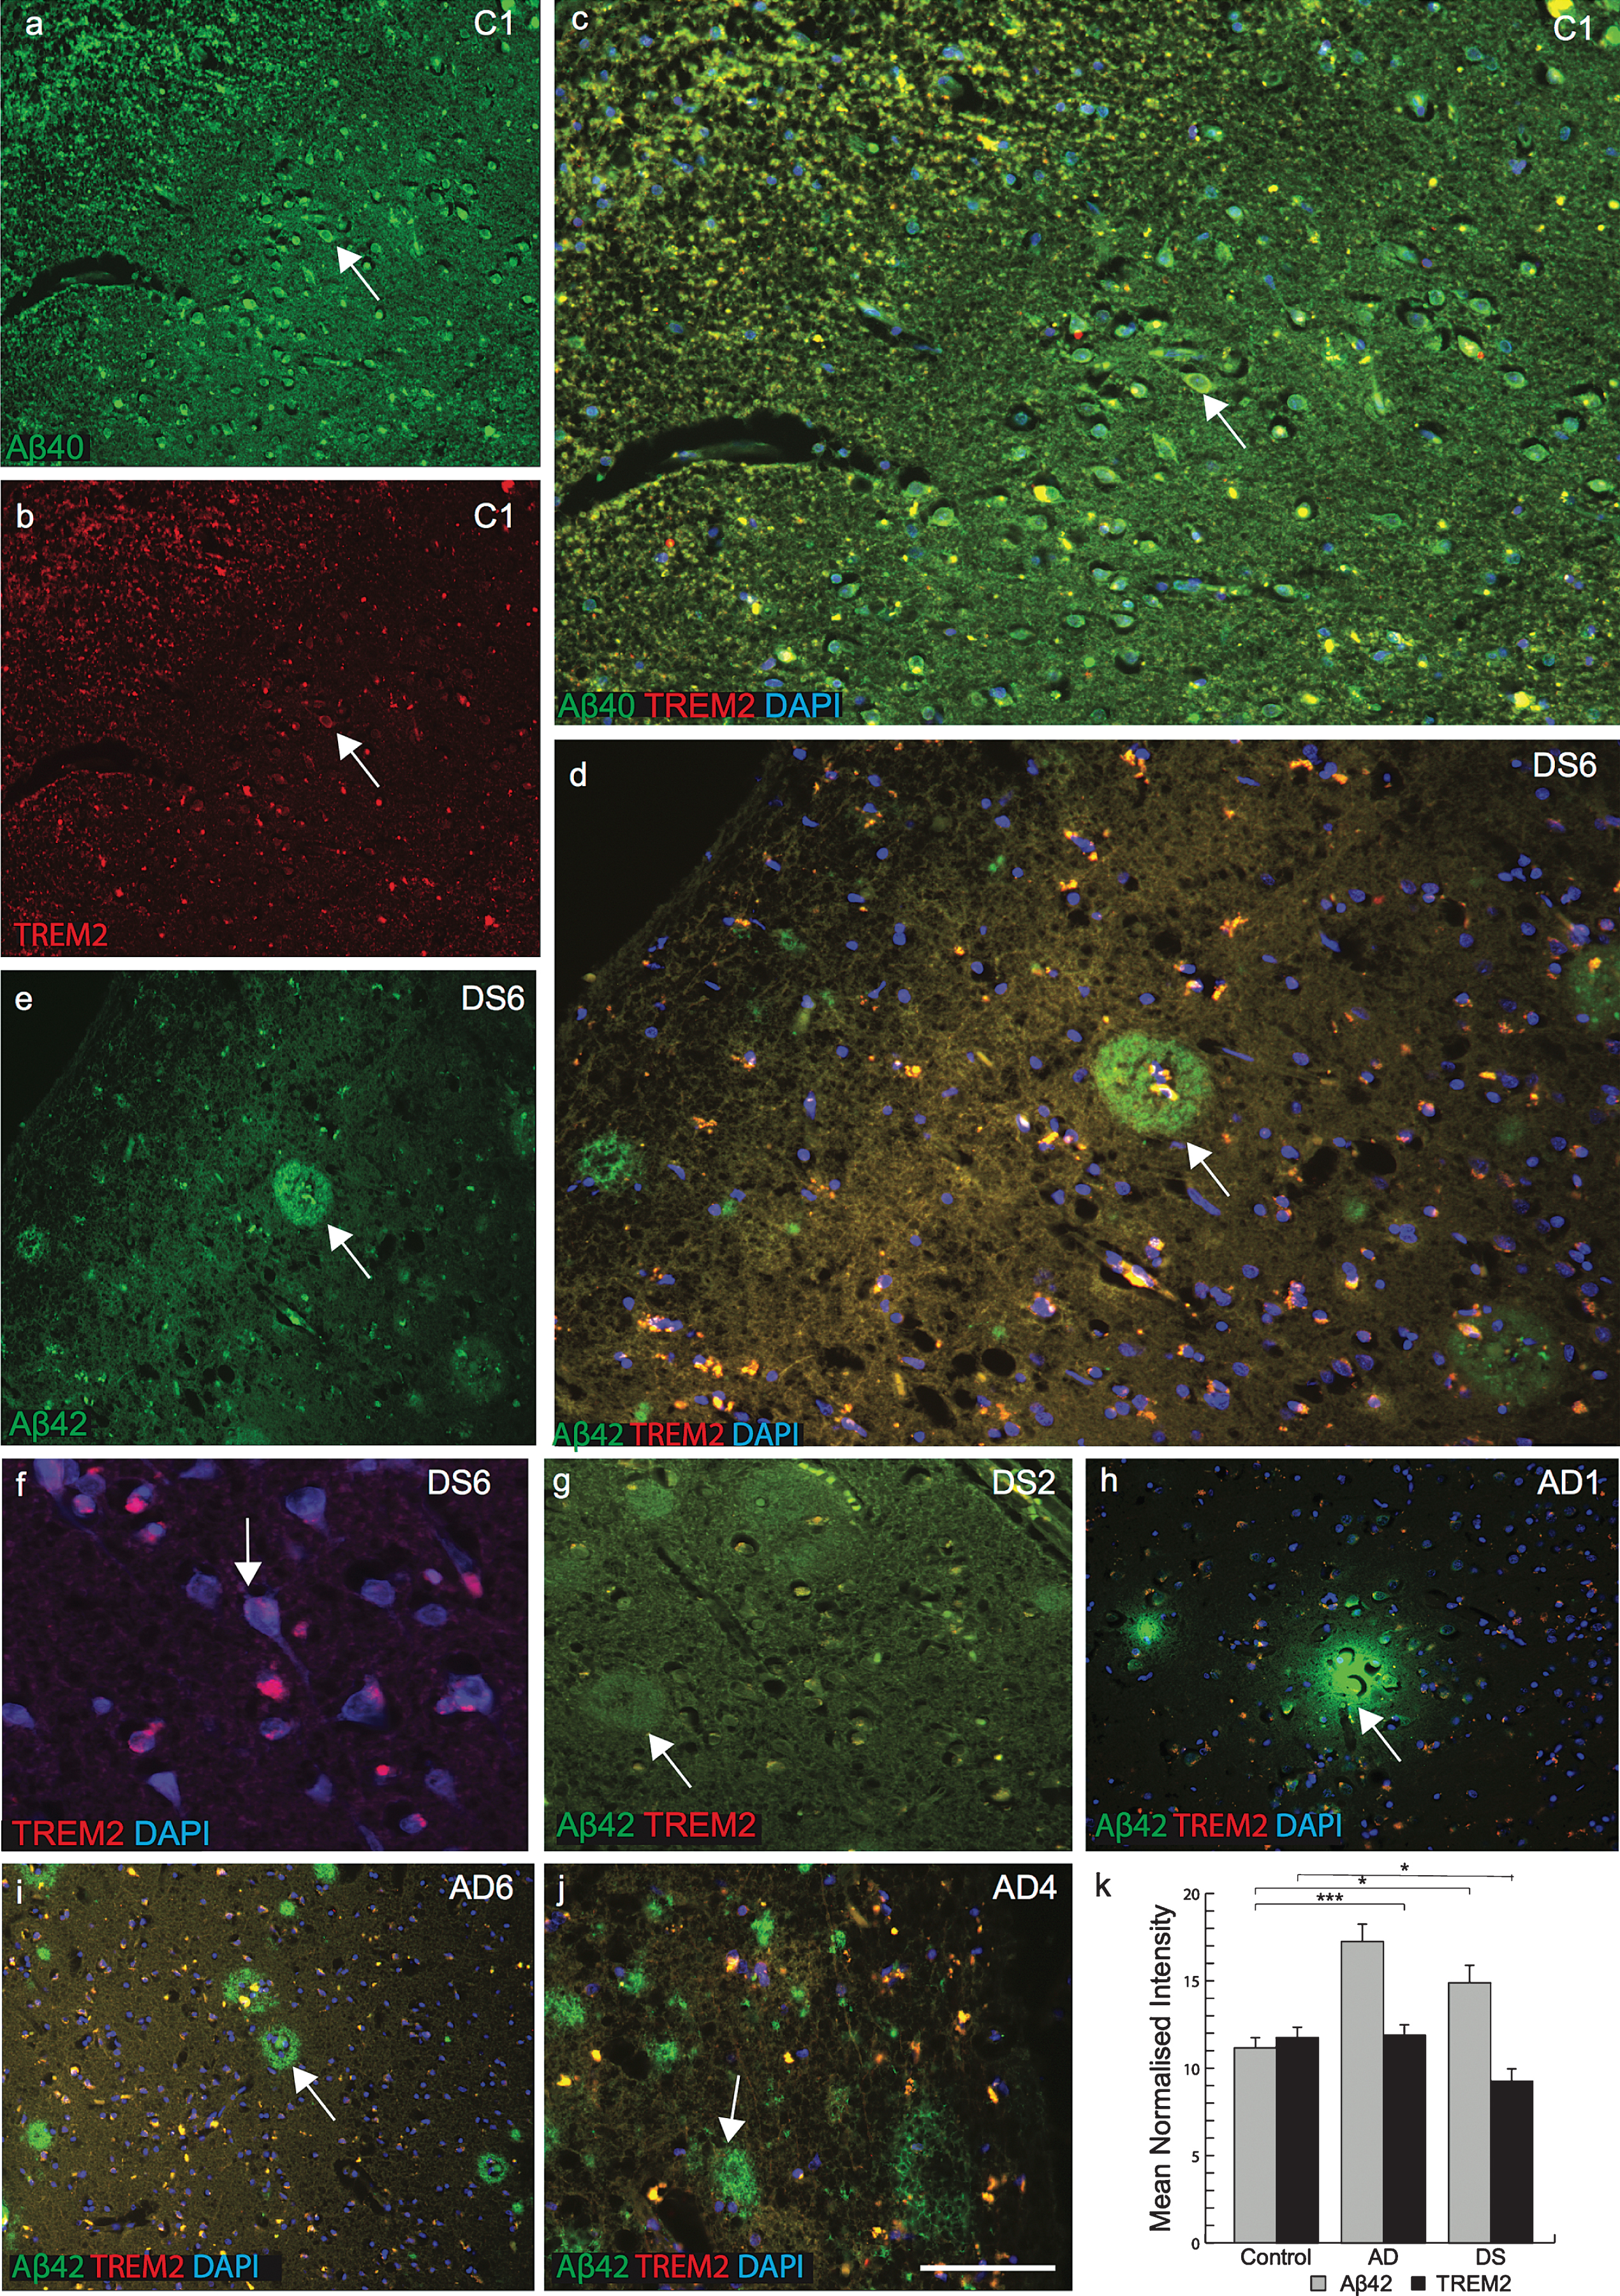 TREM2 protein is absent in senile plaques in DS brain. Double immunofluorescence staining was performed in the temporal cortex of normal control brain tissue by using the rabbit polyclonal anti-Aβ40 (green), mouse monoclonal anti-TREM2 (red), and DAPI for nuclei (Blue). Aβ40 immunoreactivity was visible in pyramidal neurons (a), TREM2 in the cell body (b), and both proteins co-localized in the perinuclear location in pyramidal neurons (c). In DS (DS6), layer III temporal cortex sections stained for Aβ42 (green) and TREM2 (red) showed many mature plaques (d & e). TREM2 was rarely present in the core of the plaques (d) and in neurons (f). Further staining on a different case (DS2) showed that Aβ42 did not co-localize with TREM2 (g). In AD brain, TREM2 protein was visible around the plaques (h-j). Aβ42 level was highest in AD brain (k, p < 0.0001) and TREM2 level was lower in surviving neurons compared to control and AD brain (K, p < 0.01). The scale bar in a-e = 50μm, f = 25μm, and g = 40μm. These data represent the mean±S.E from three independent experiments. Error bars indicate SEM. *p < 0.01, **p < 0.001, ***p < 0.0001.